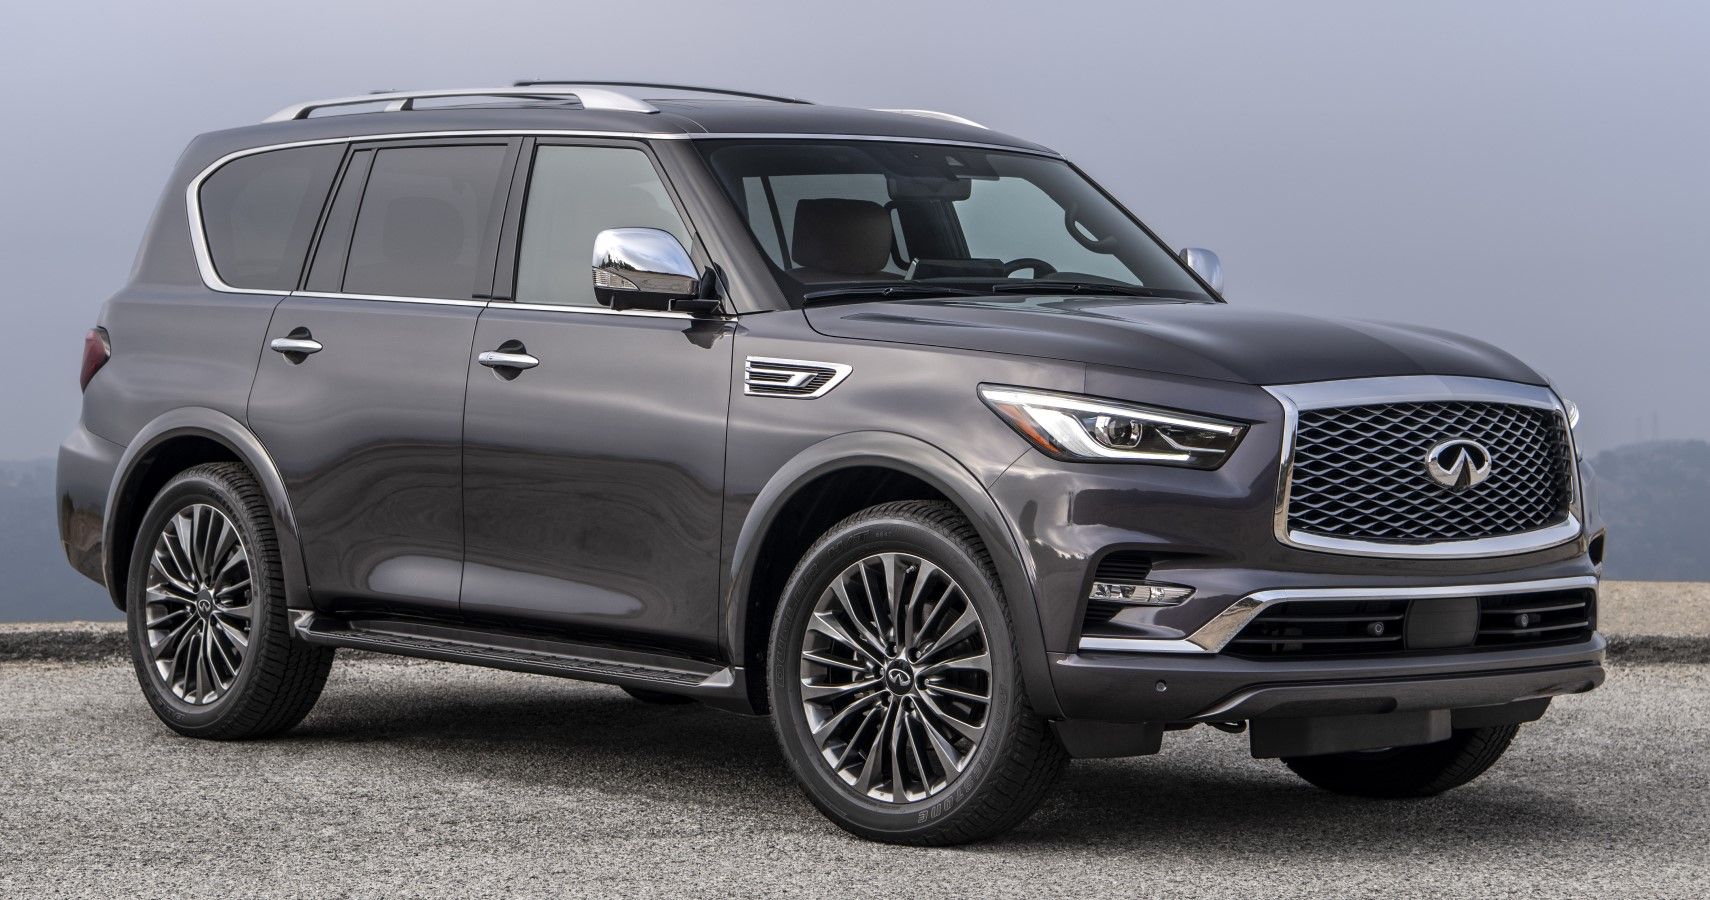 2023 Infiniti QX80 Gets More Desirable With New Tech And Features